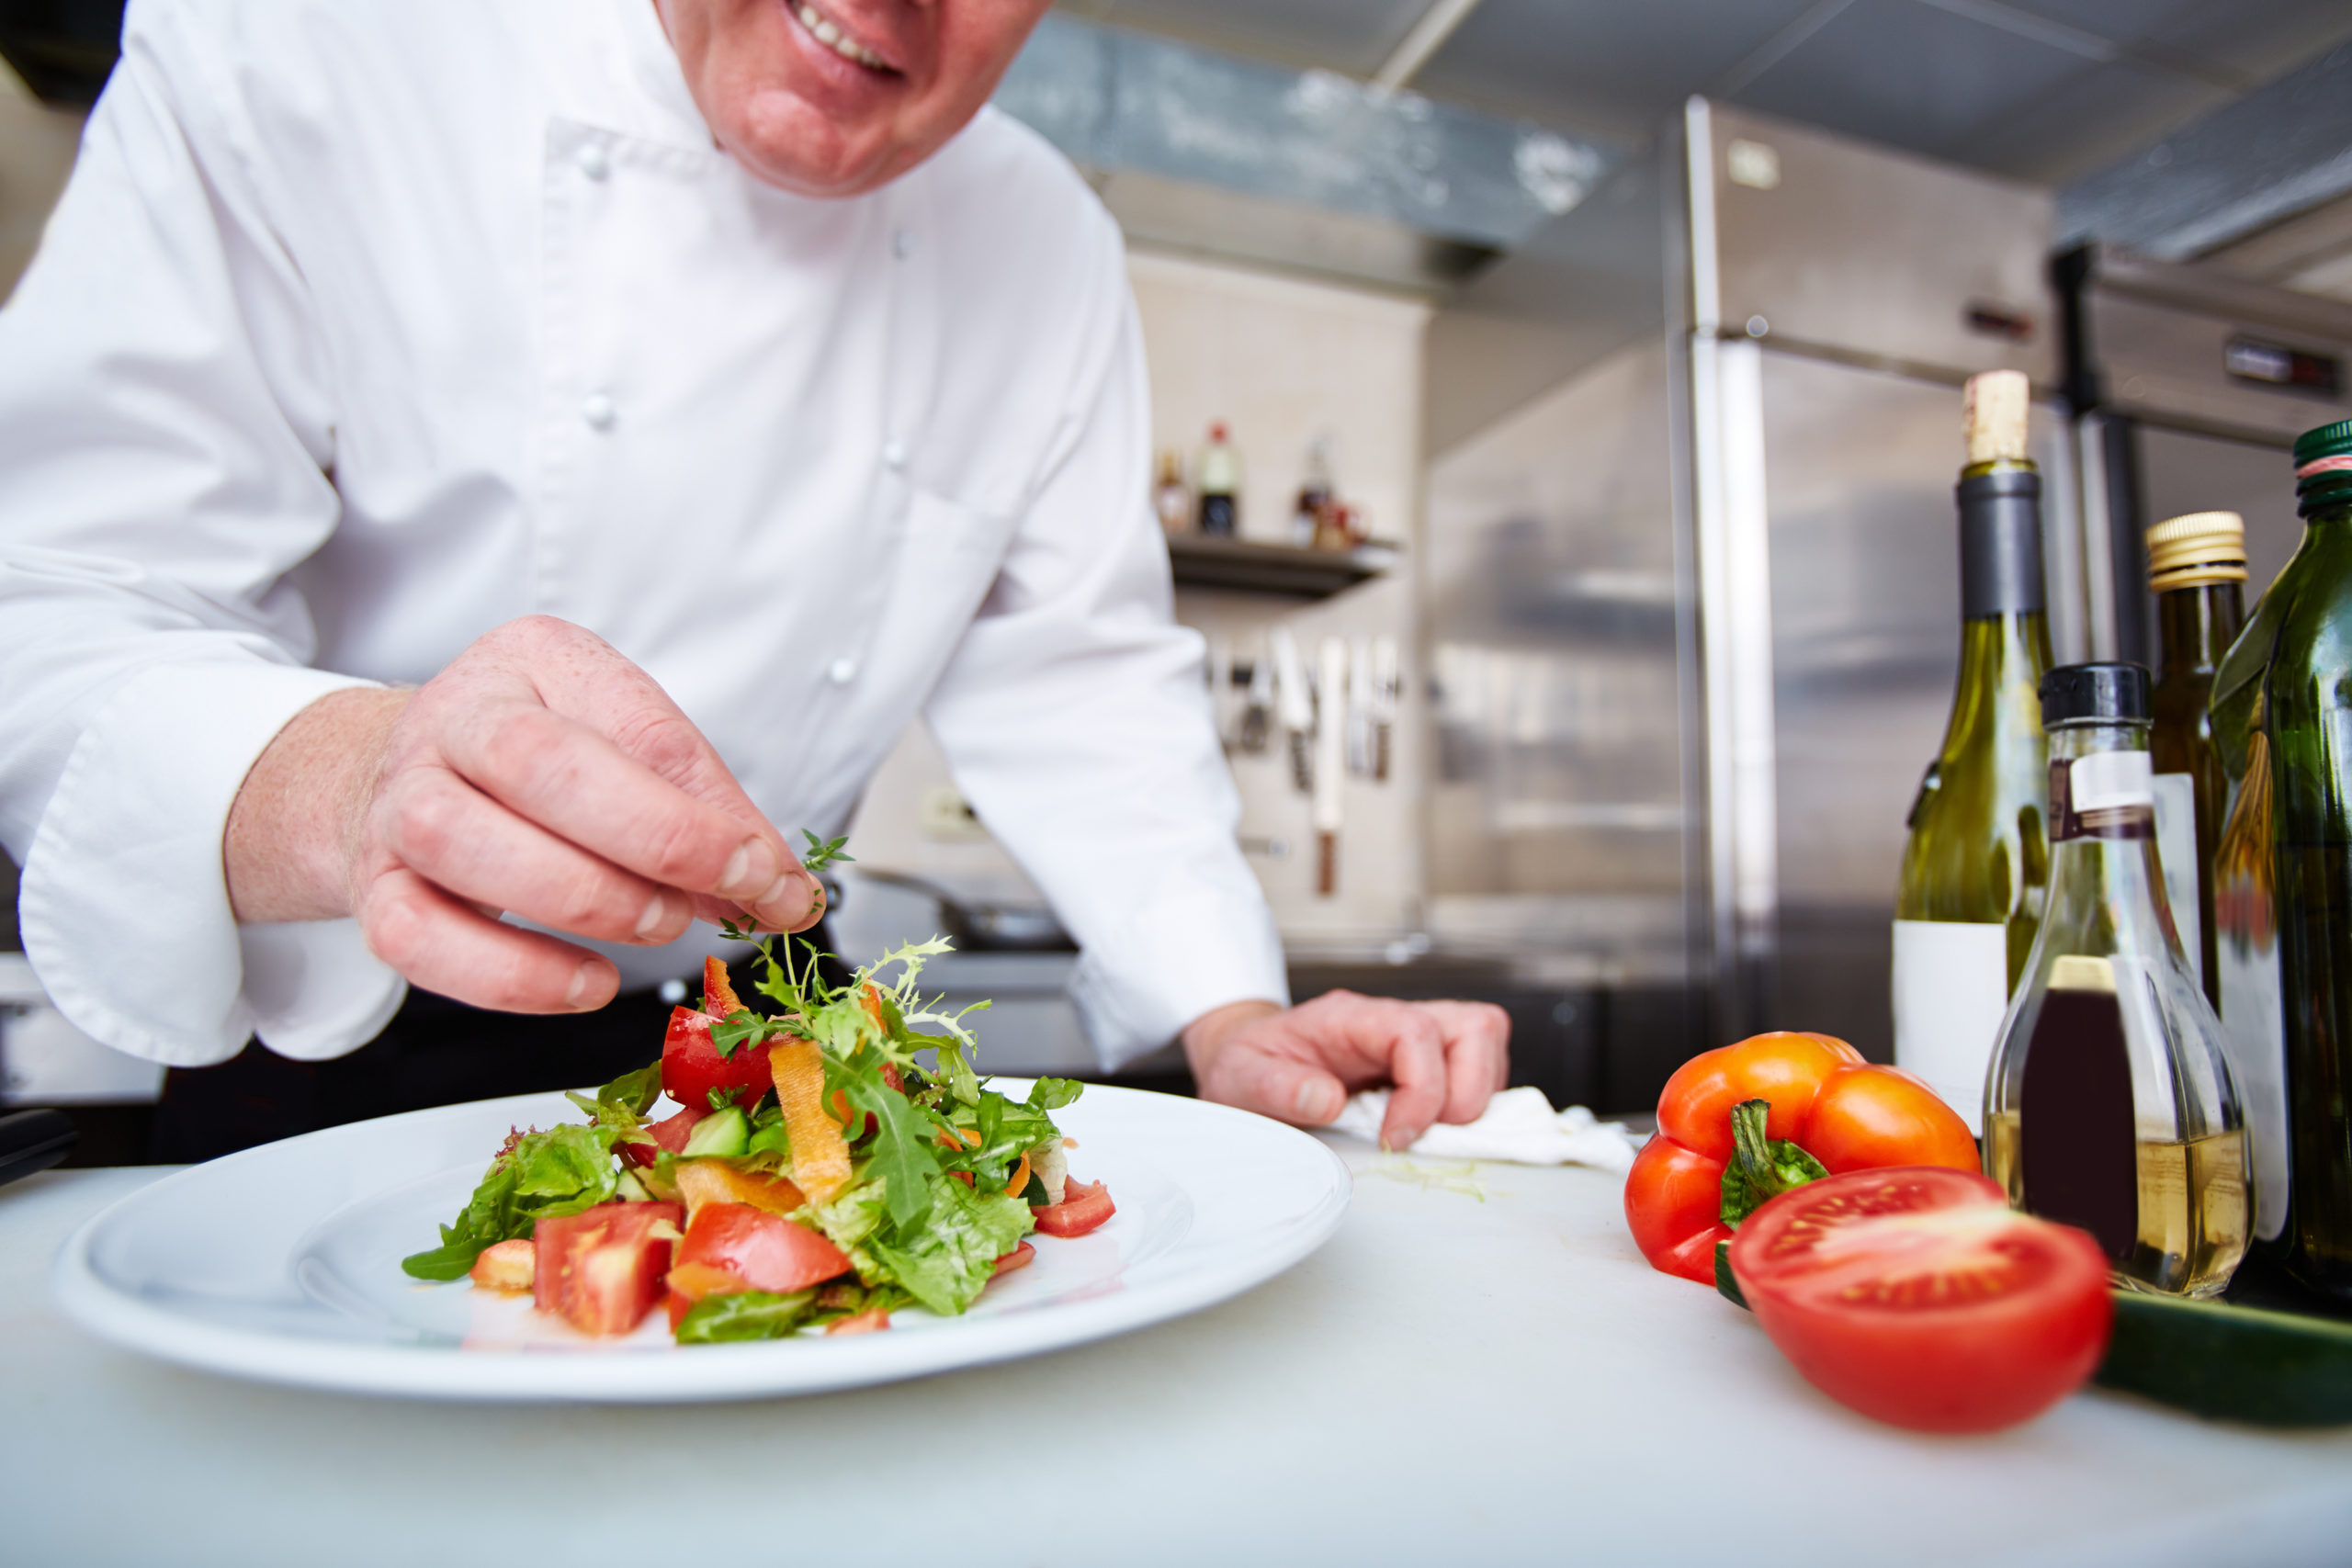 A man in a white chef coat adding herbs to a plate of salad